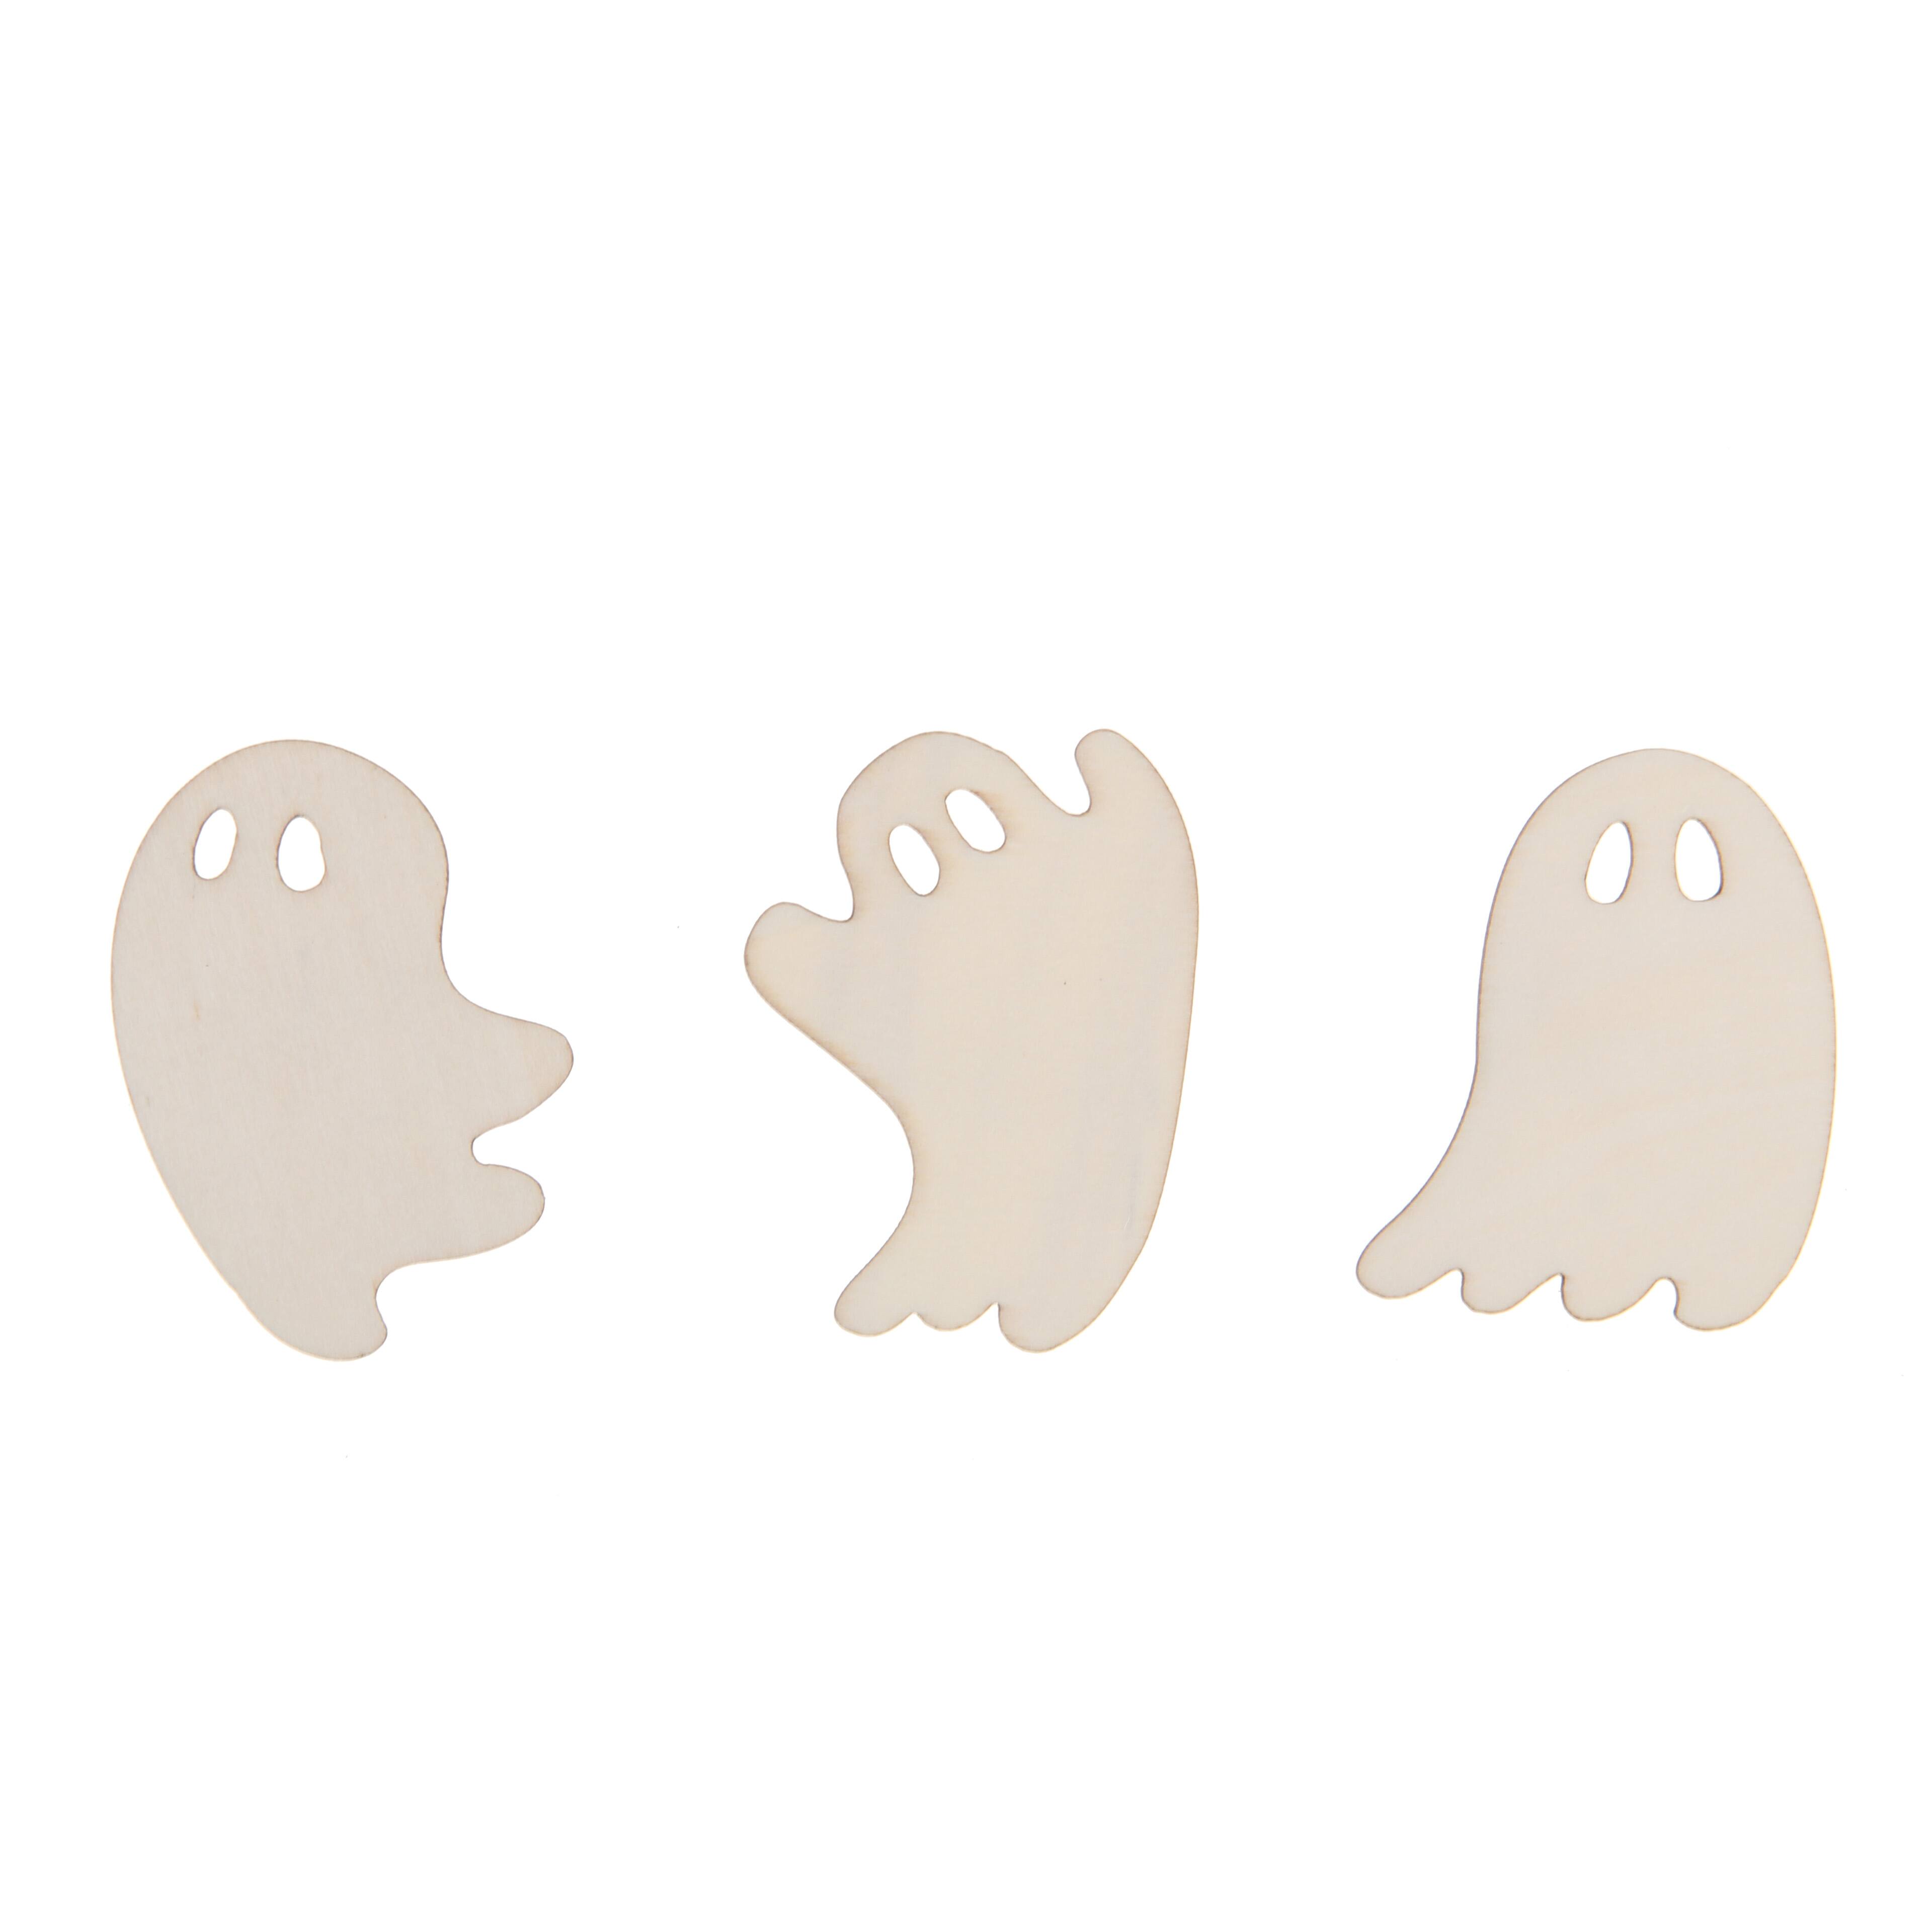 Ghost MDF wall art craft shape halloween party 